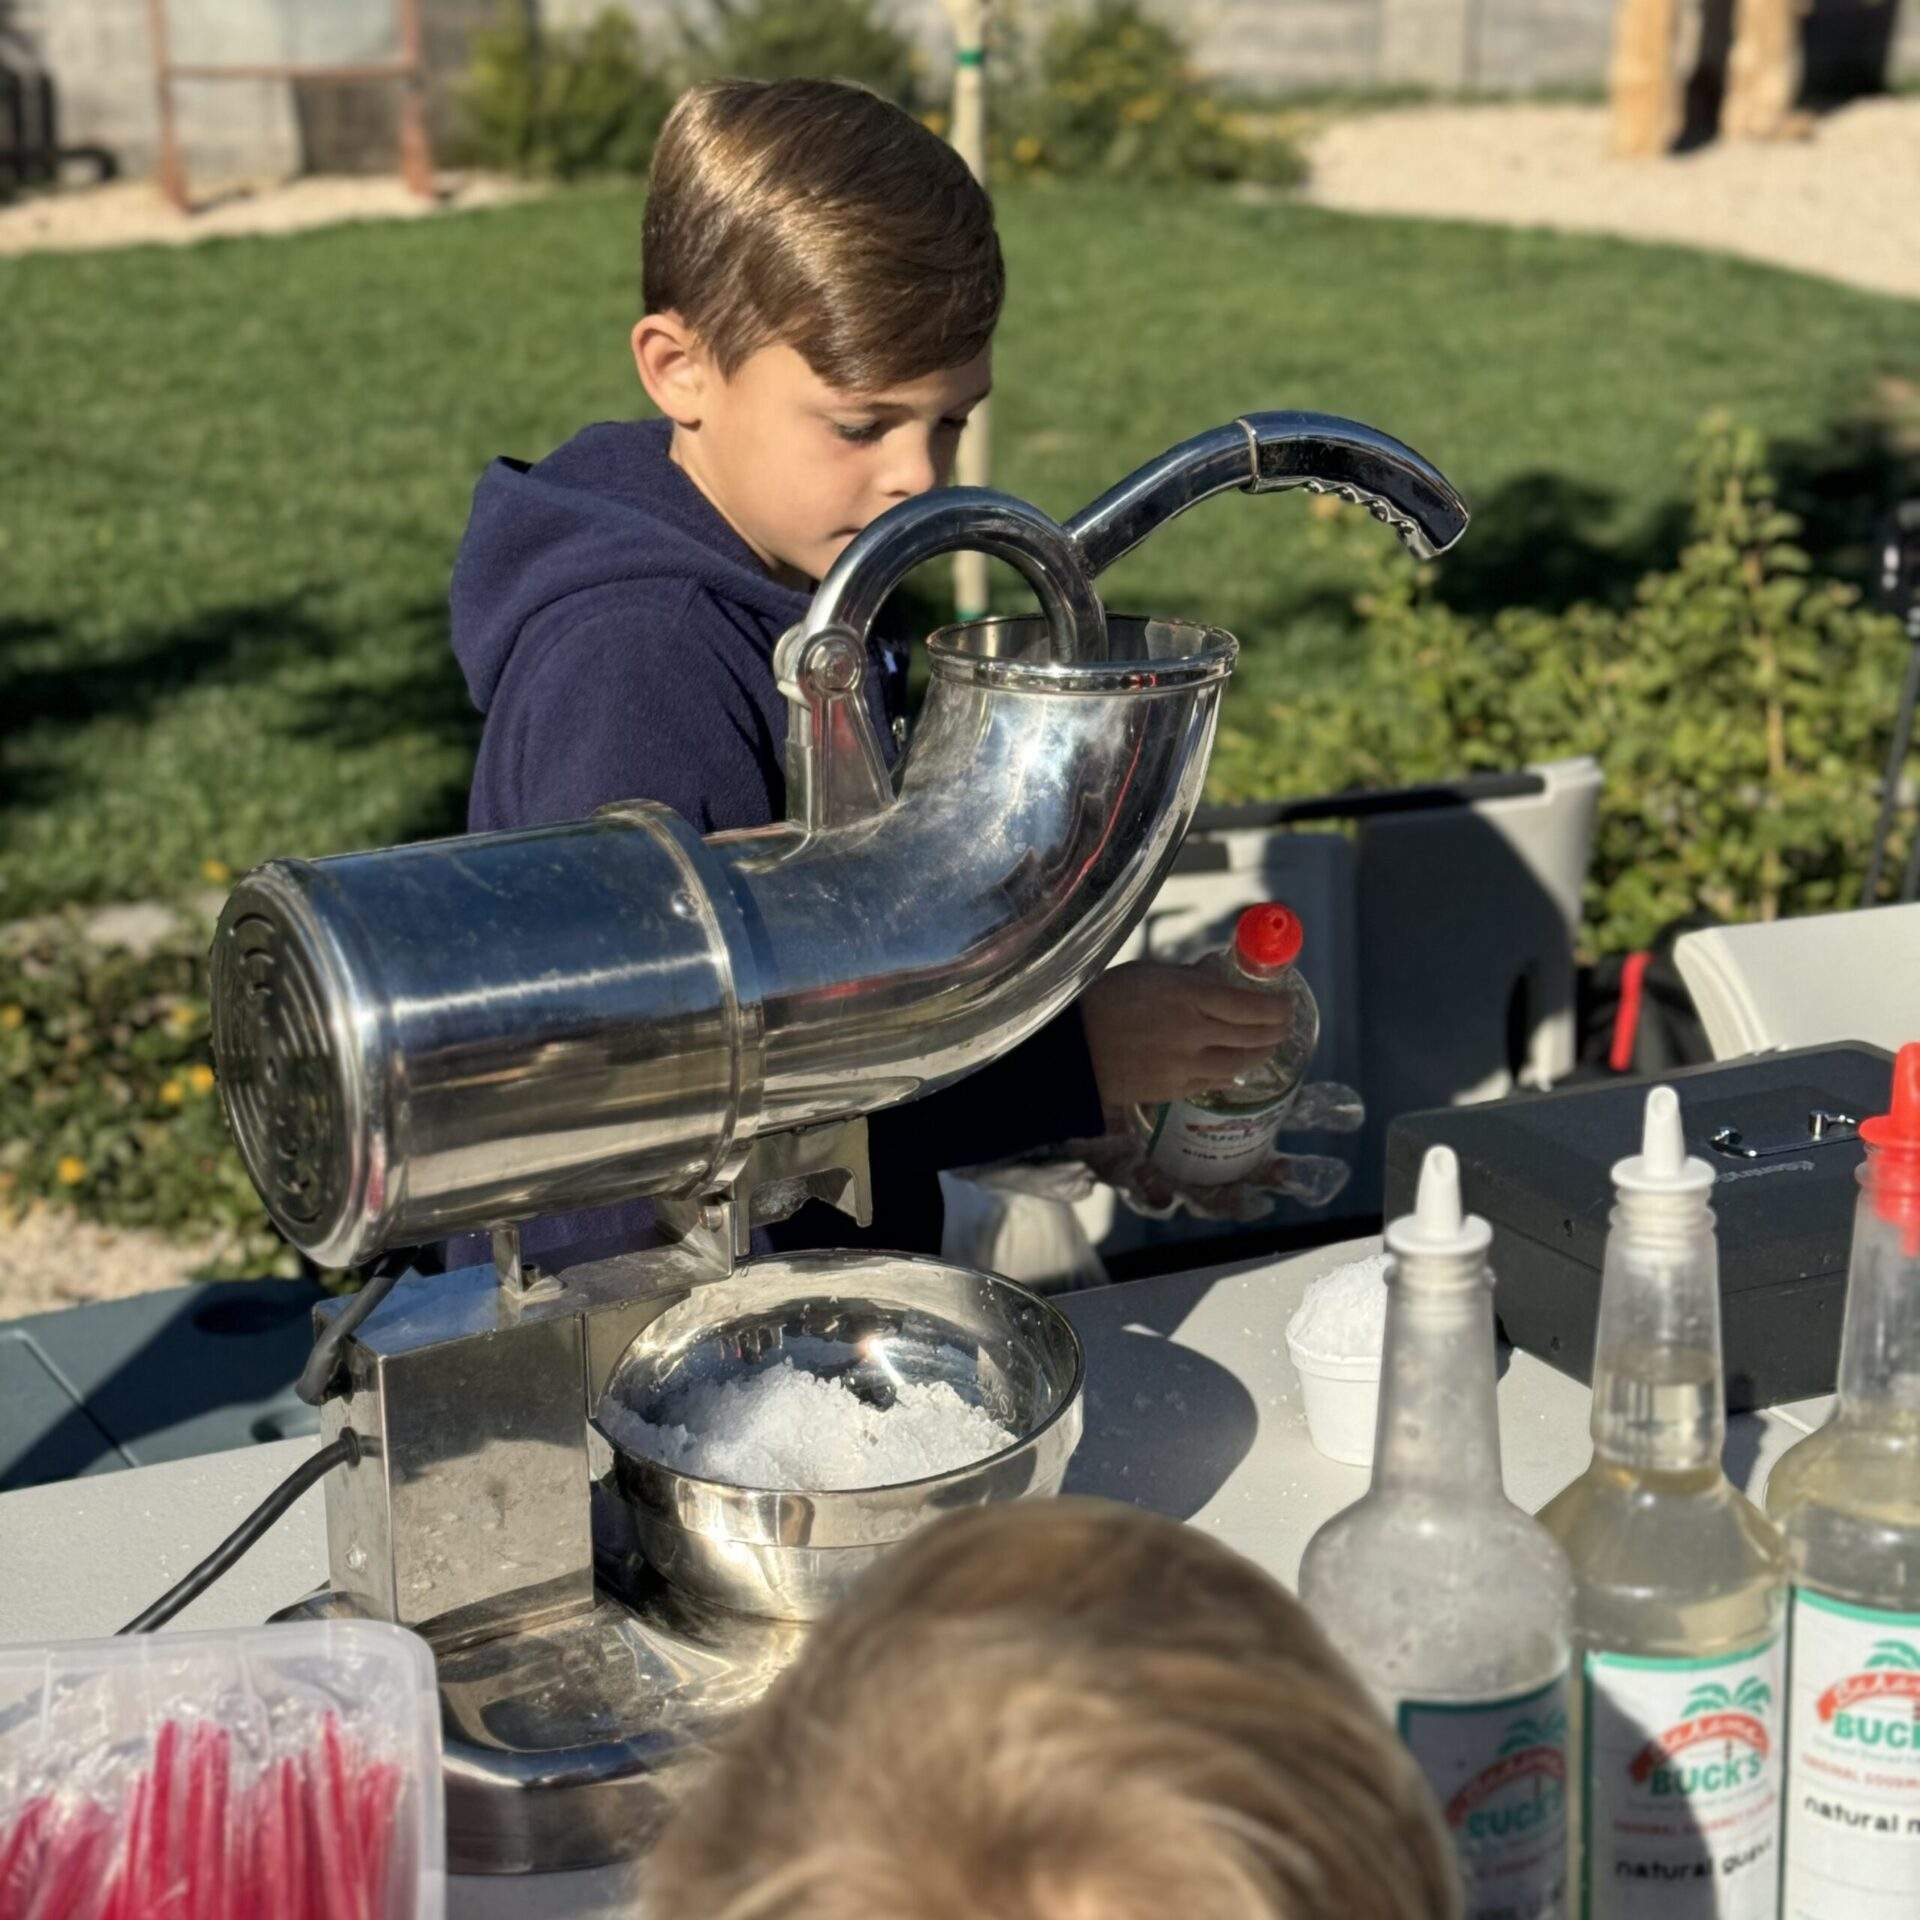 the-st-george-childrens-business-fair-acton-academy-st-george-ut-private-school-snowcone-business